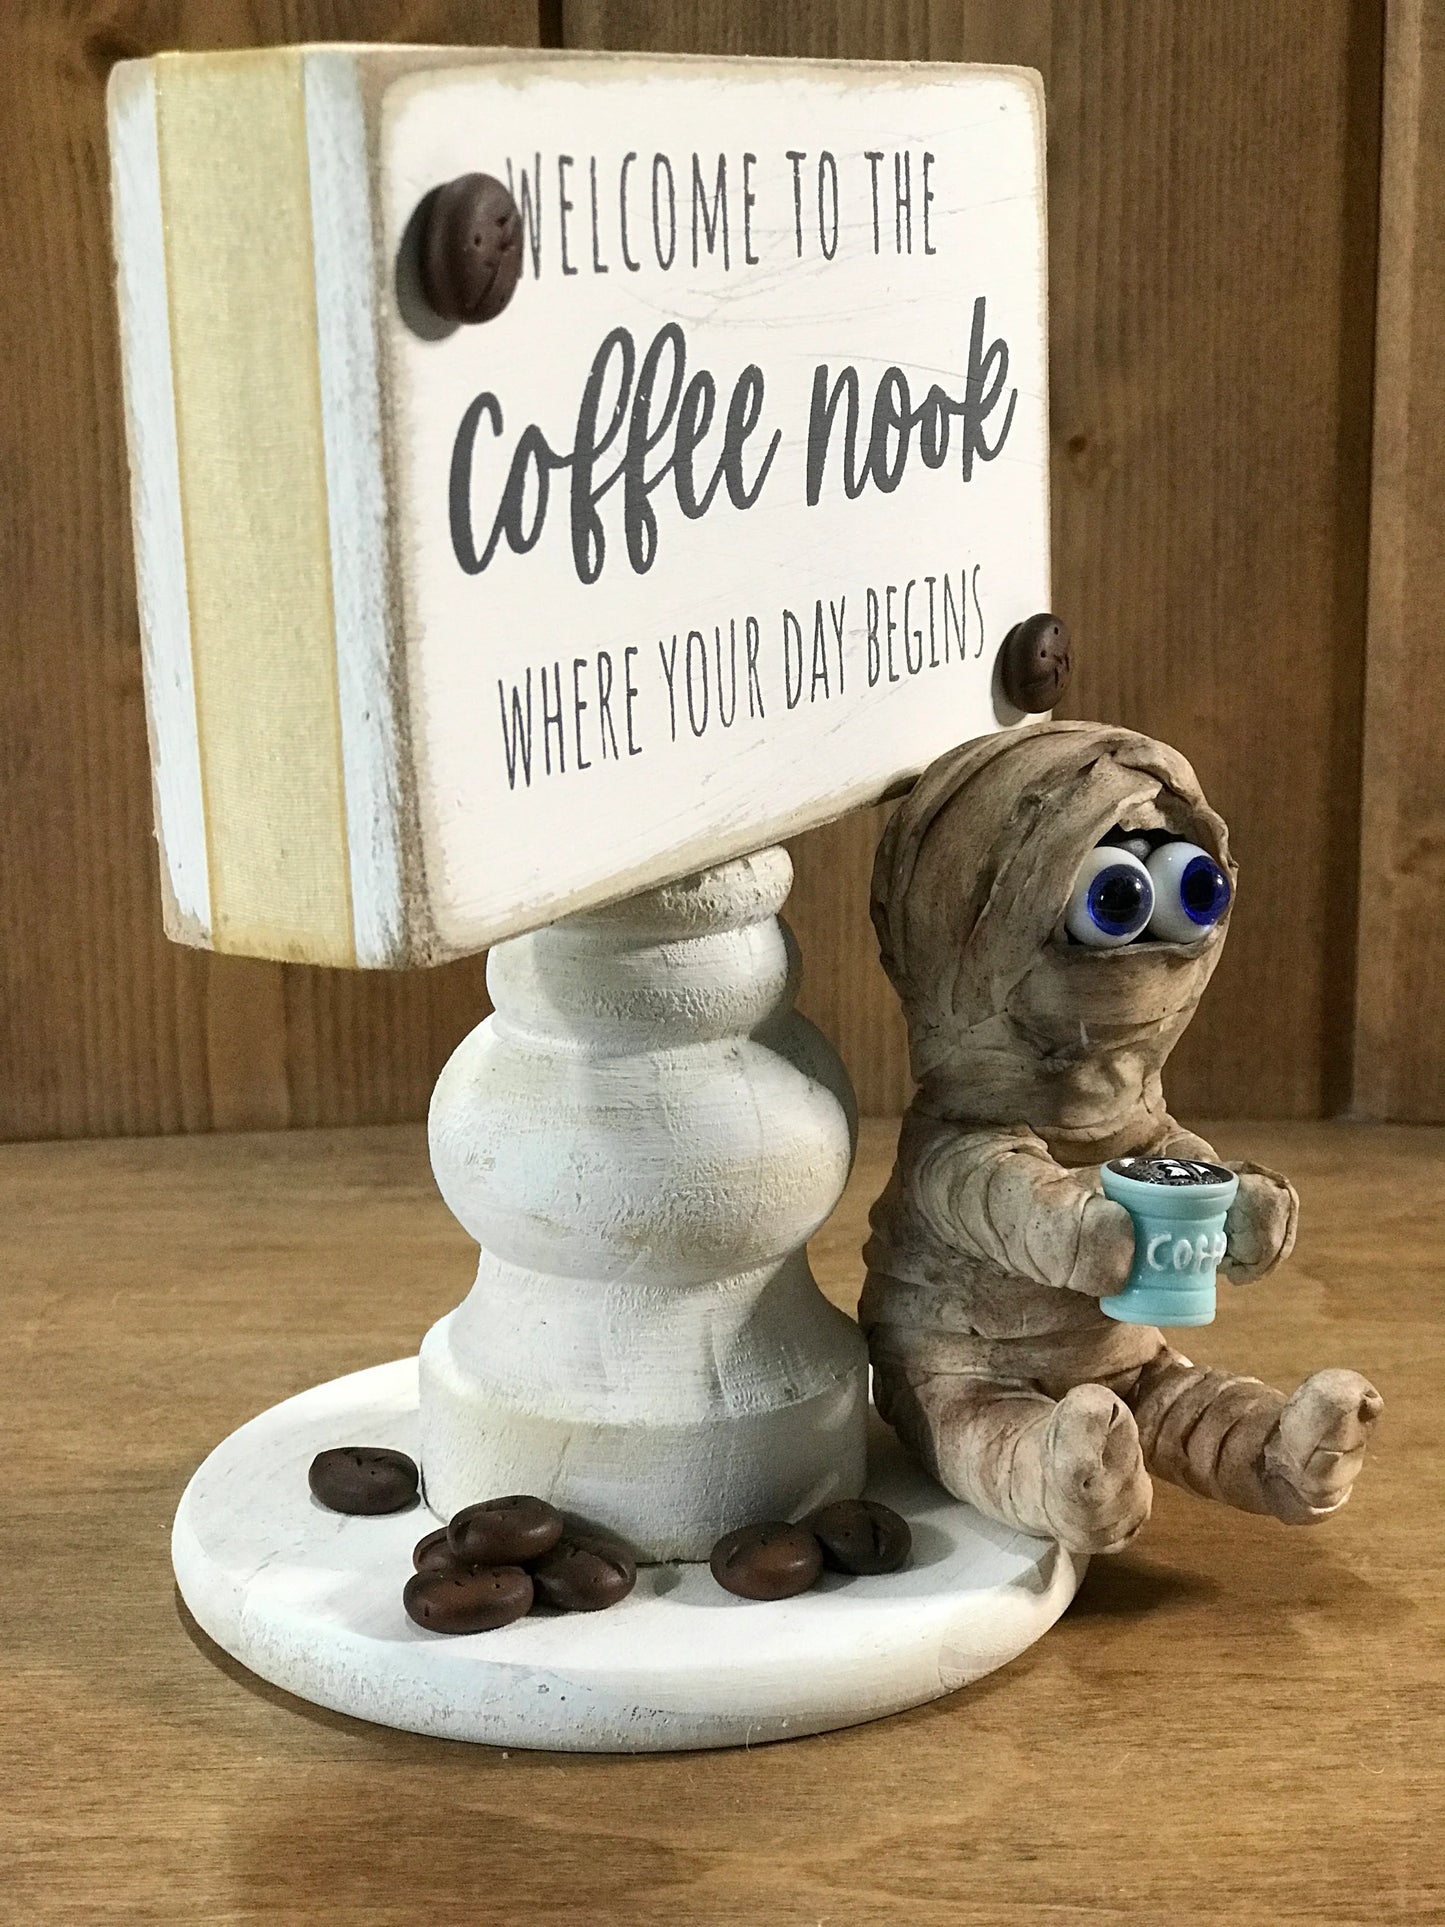 Blue Eye Mummy Drinking Morning Coffee, Welcome to Coffee Nook Decor, Java, Cute Wrapped Mummy Clay Character, Coffee Bar Decor